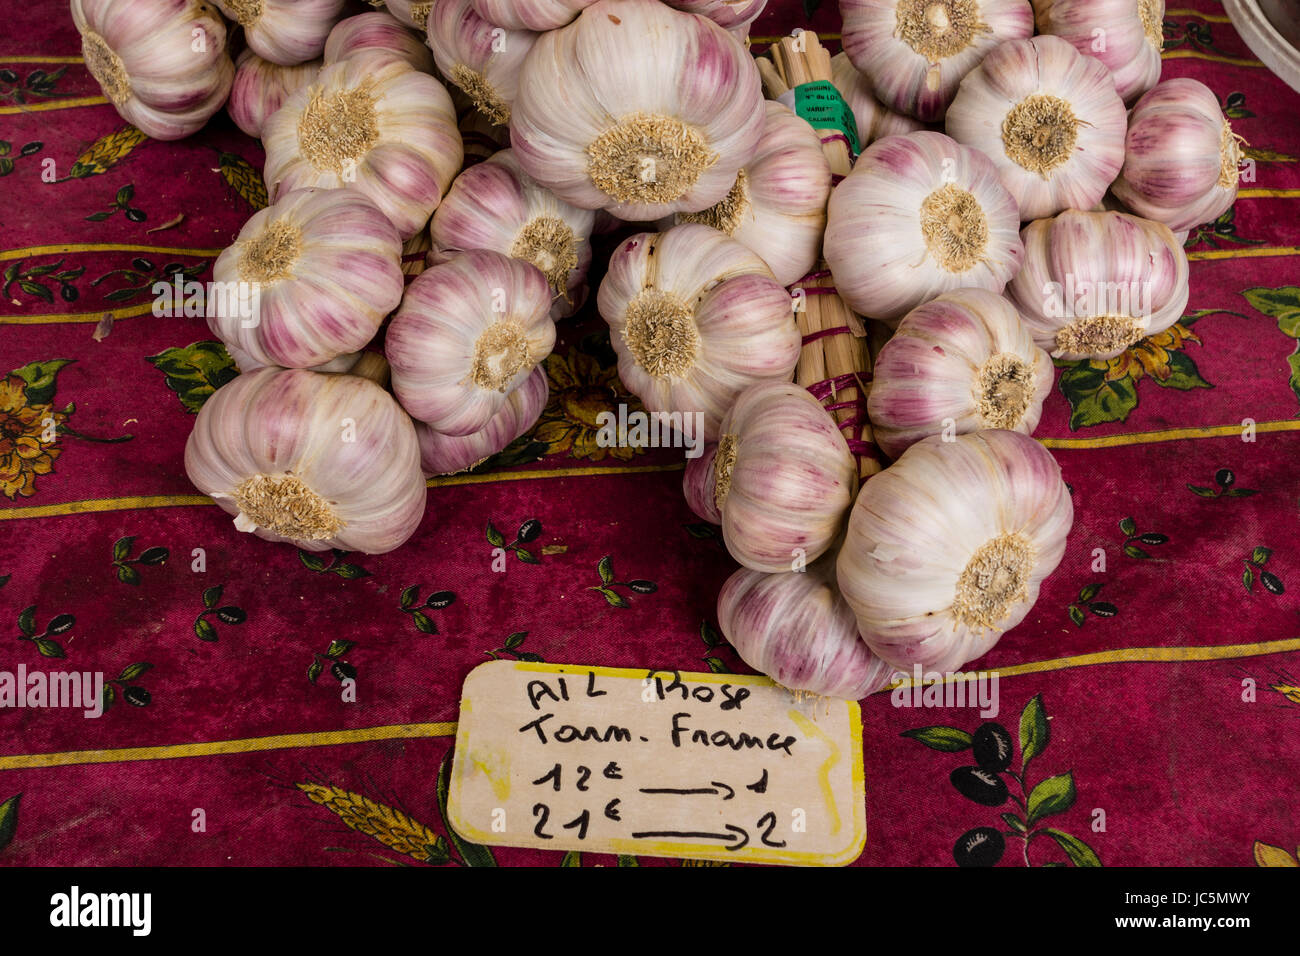 Garlic bunches (ail rose) displayed on a table at a outdoor market Stock Photo